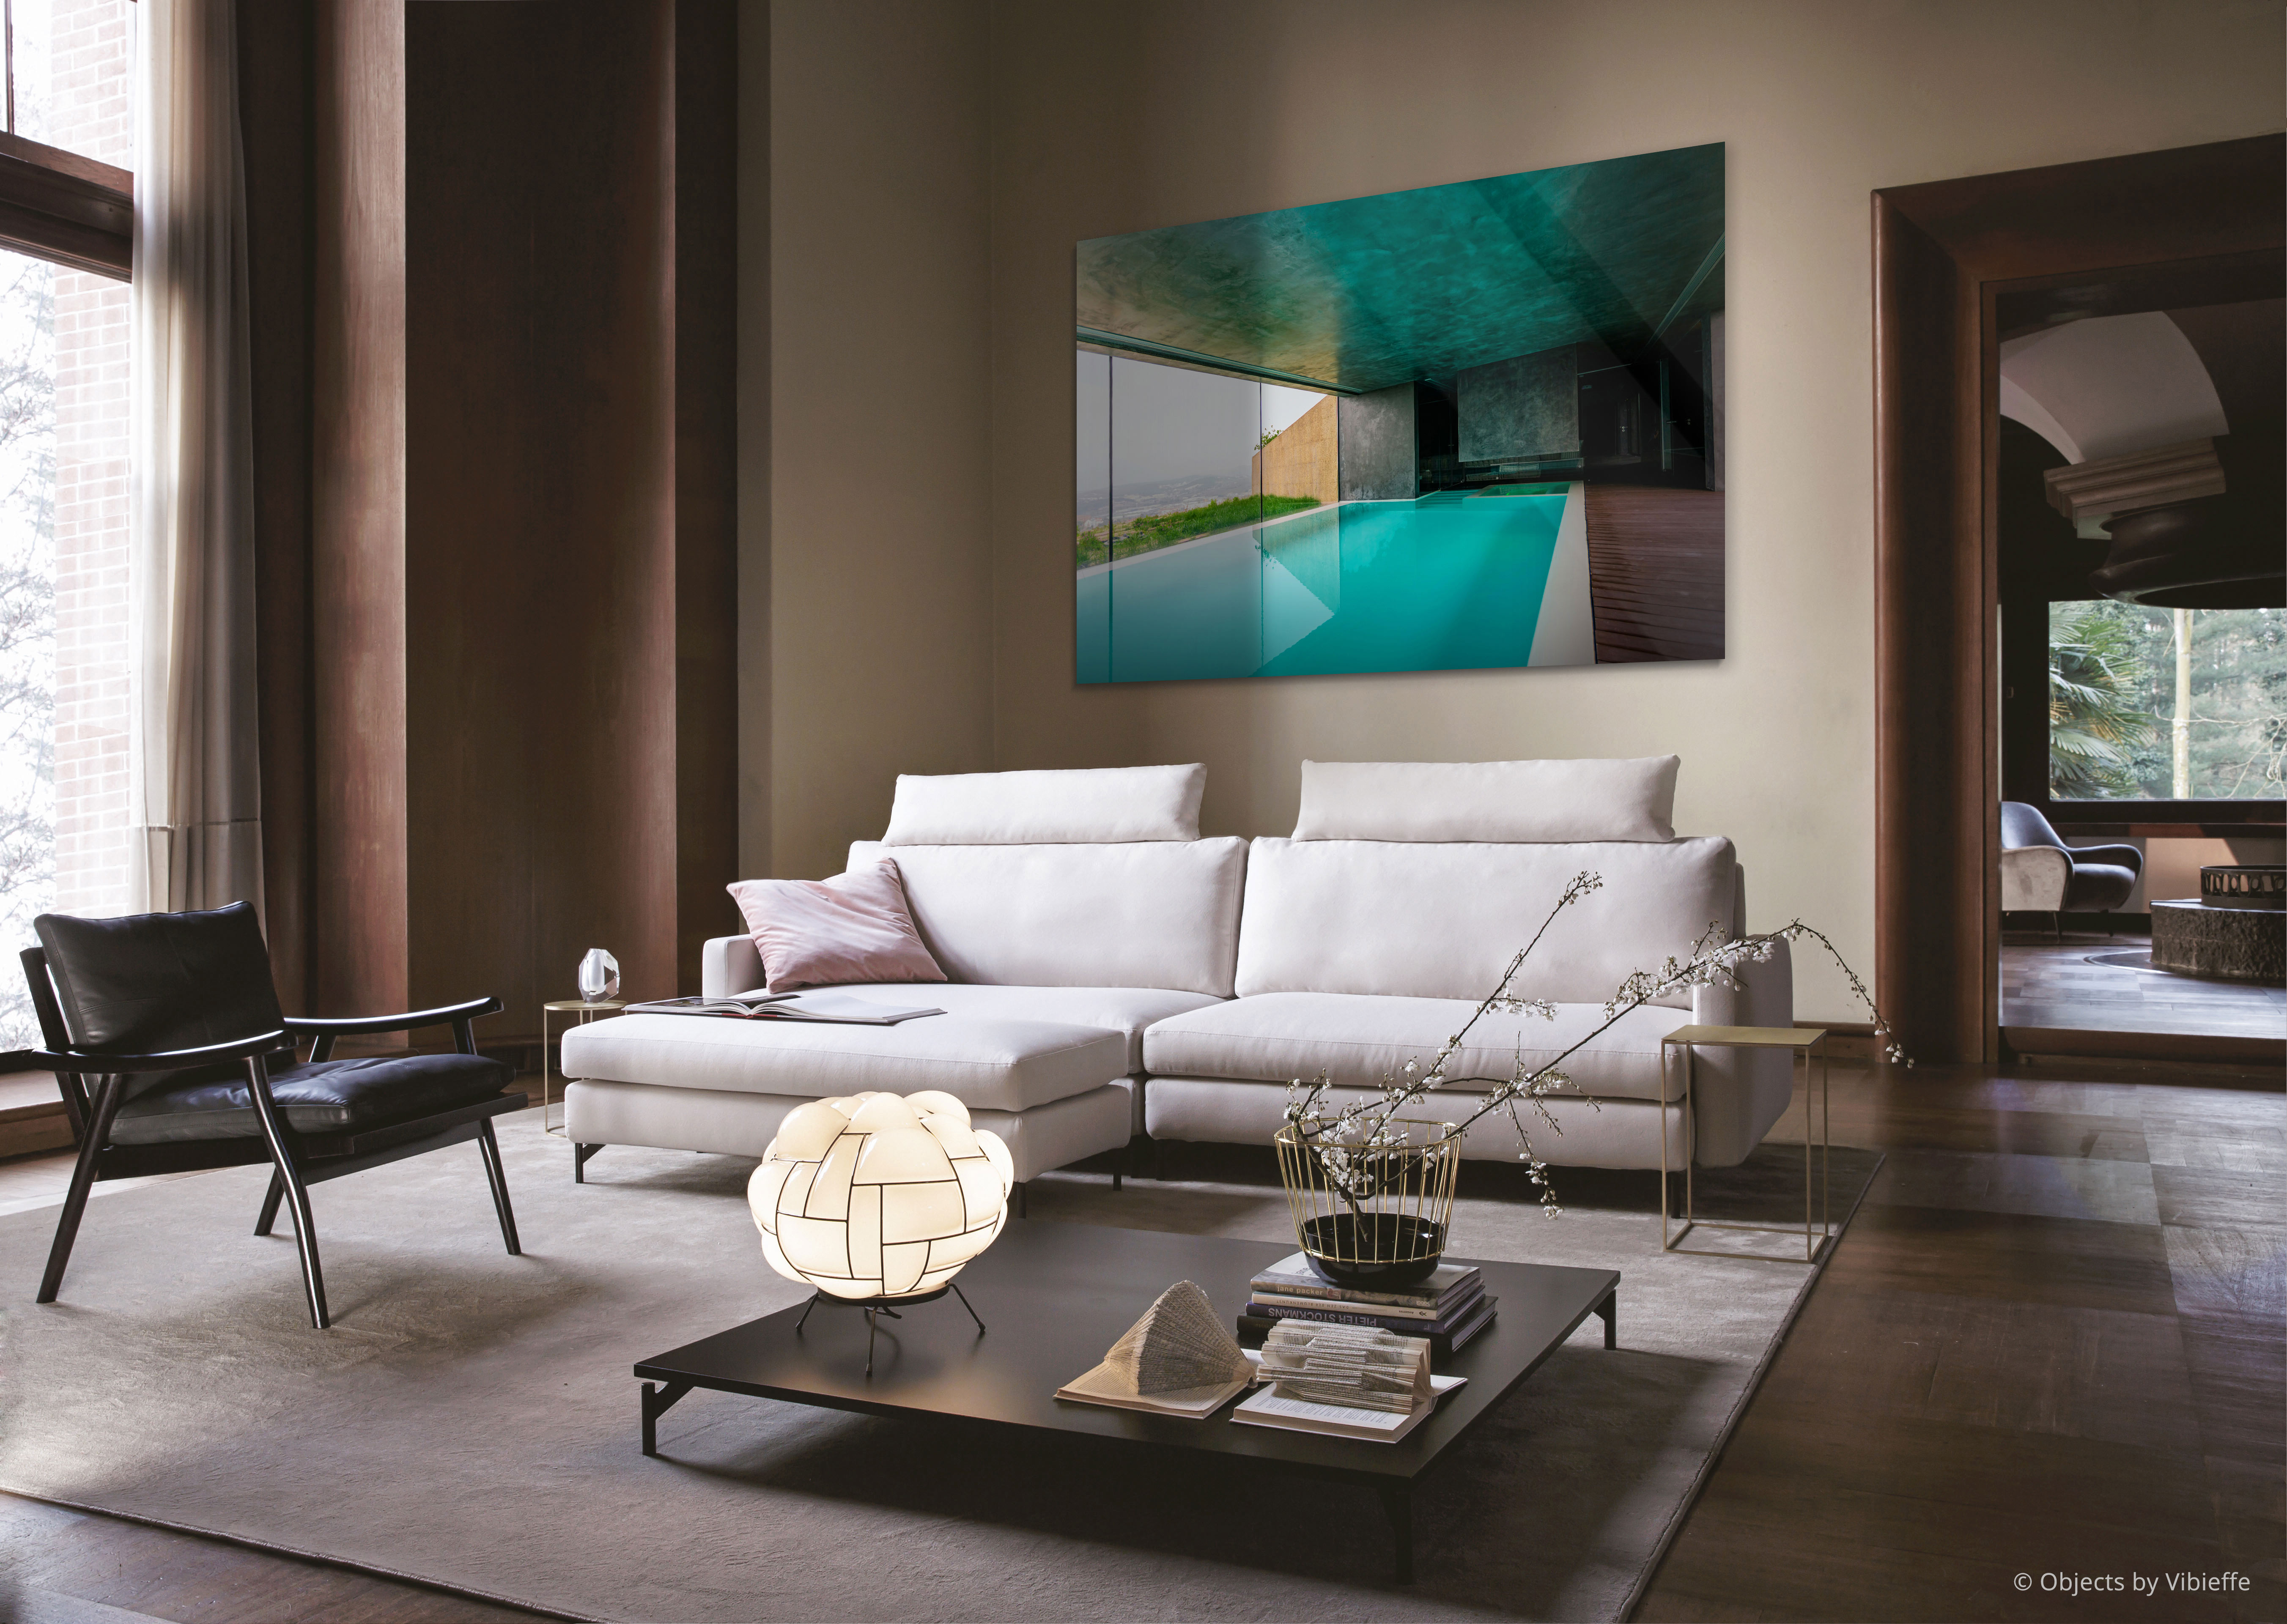 A large accent print of a favorite photo can add dimension and drama to a room.